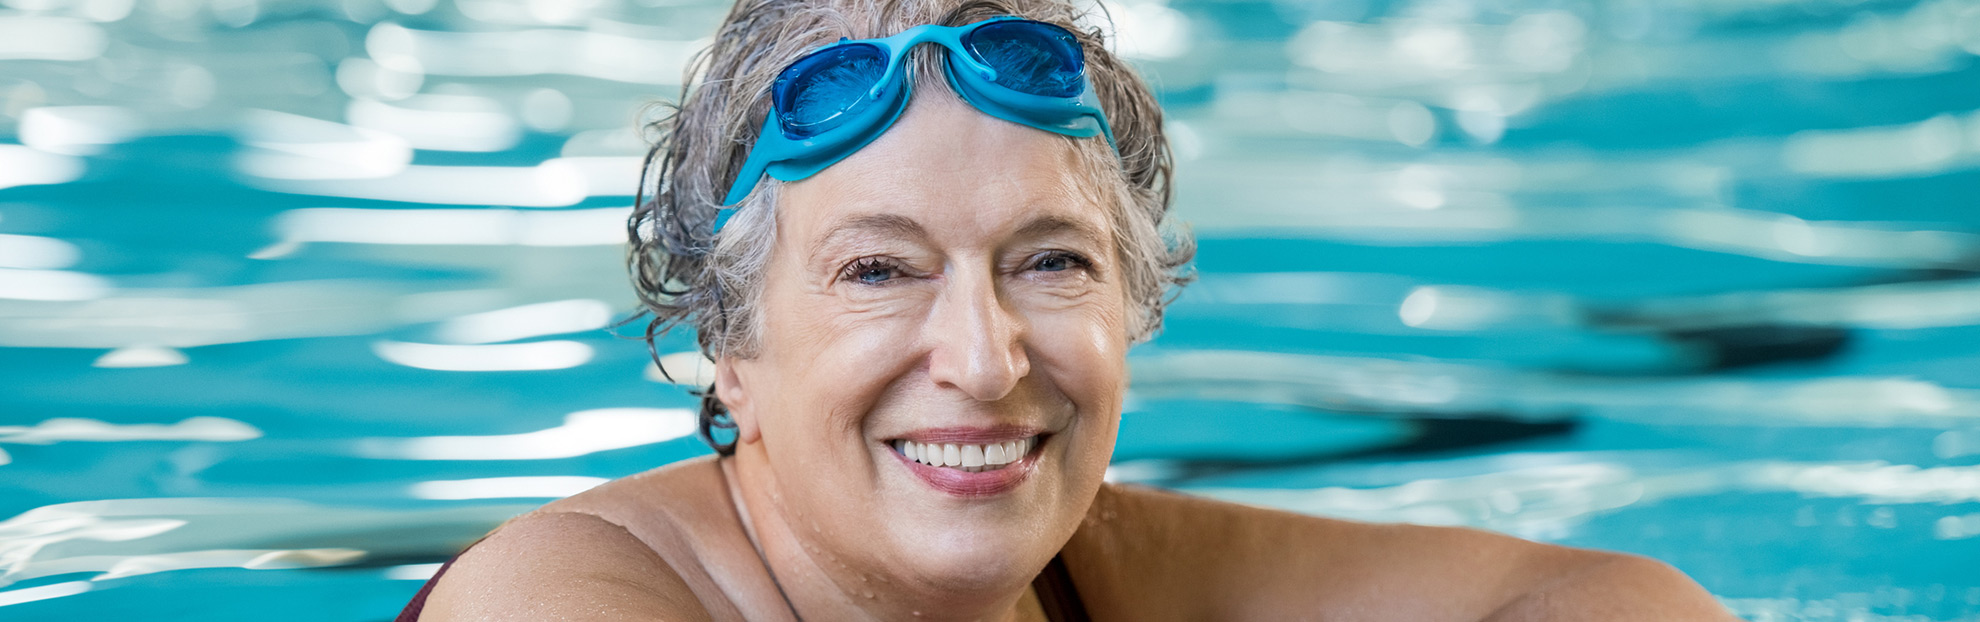 Female cataract patient, able to swim laps with clear vision after cataract surgery